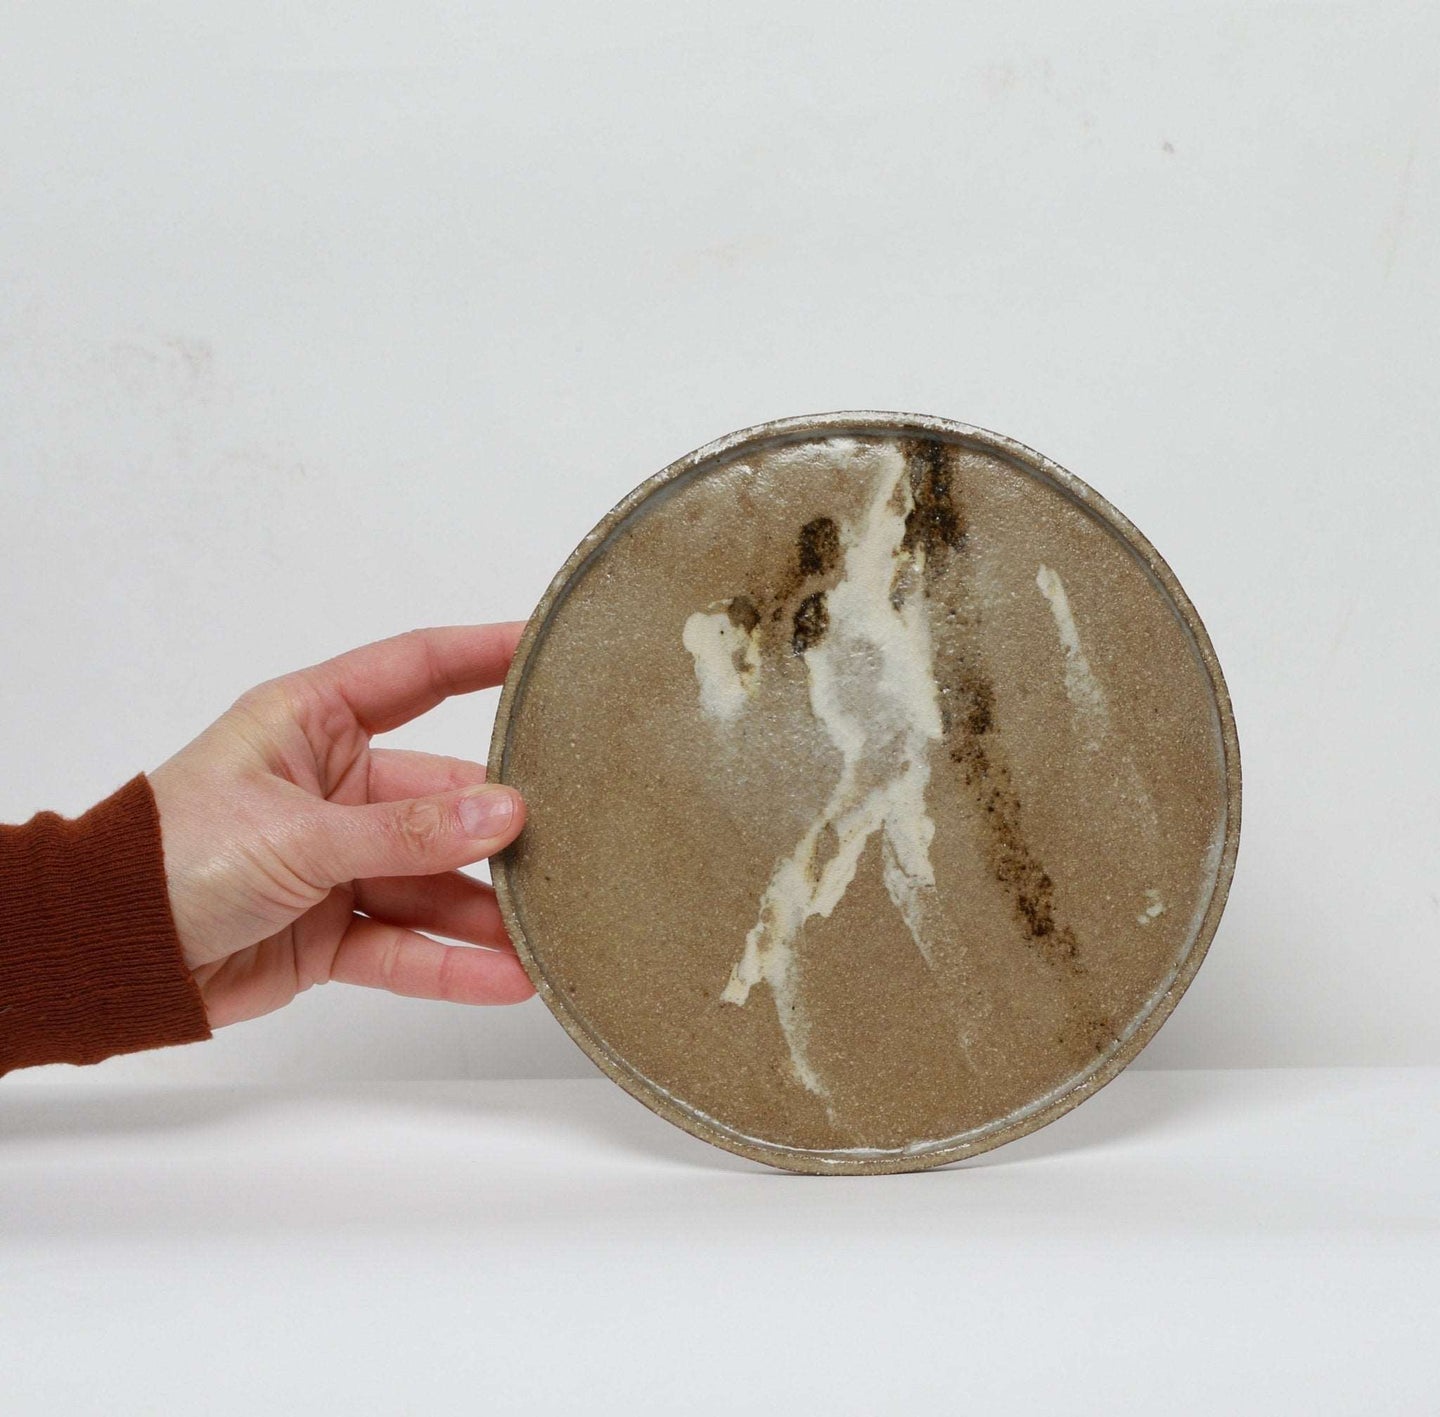 Abandoned Earth Plate 2nd Ed grey | made from discarded clay - THE HOME OF SUSTAINABLE THINGS